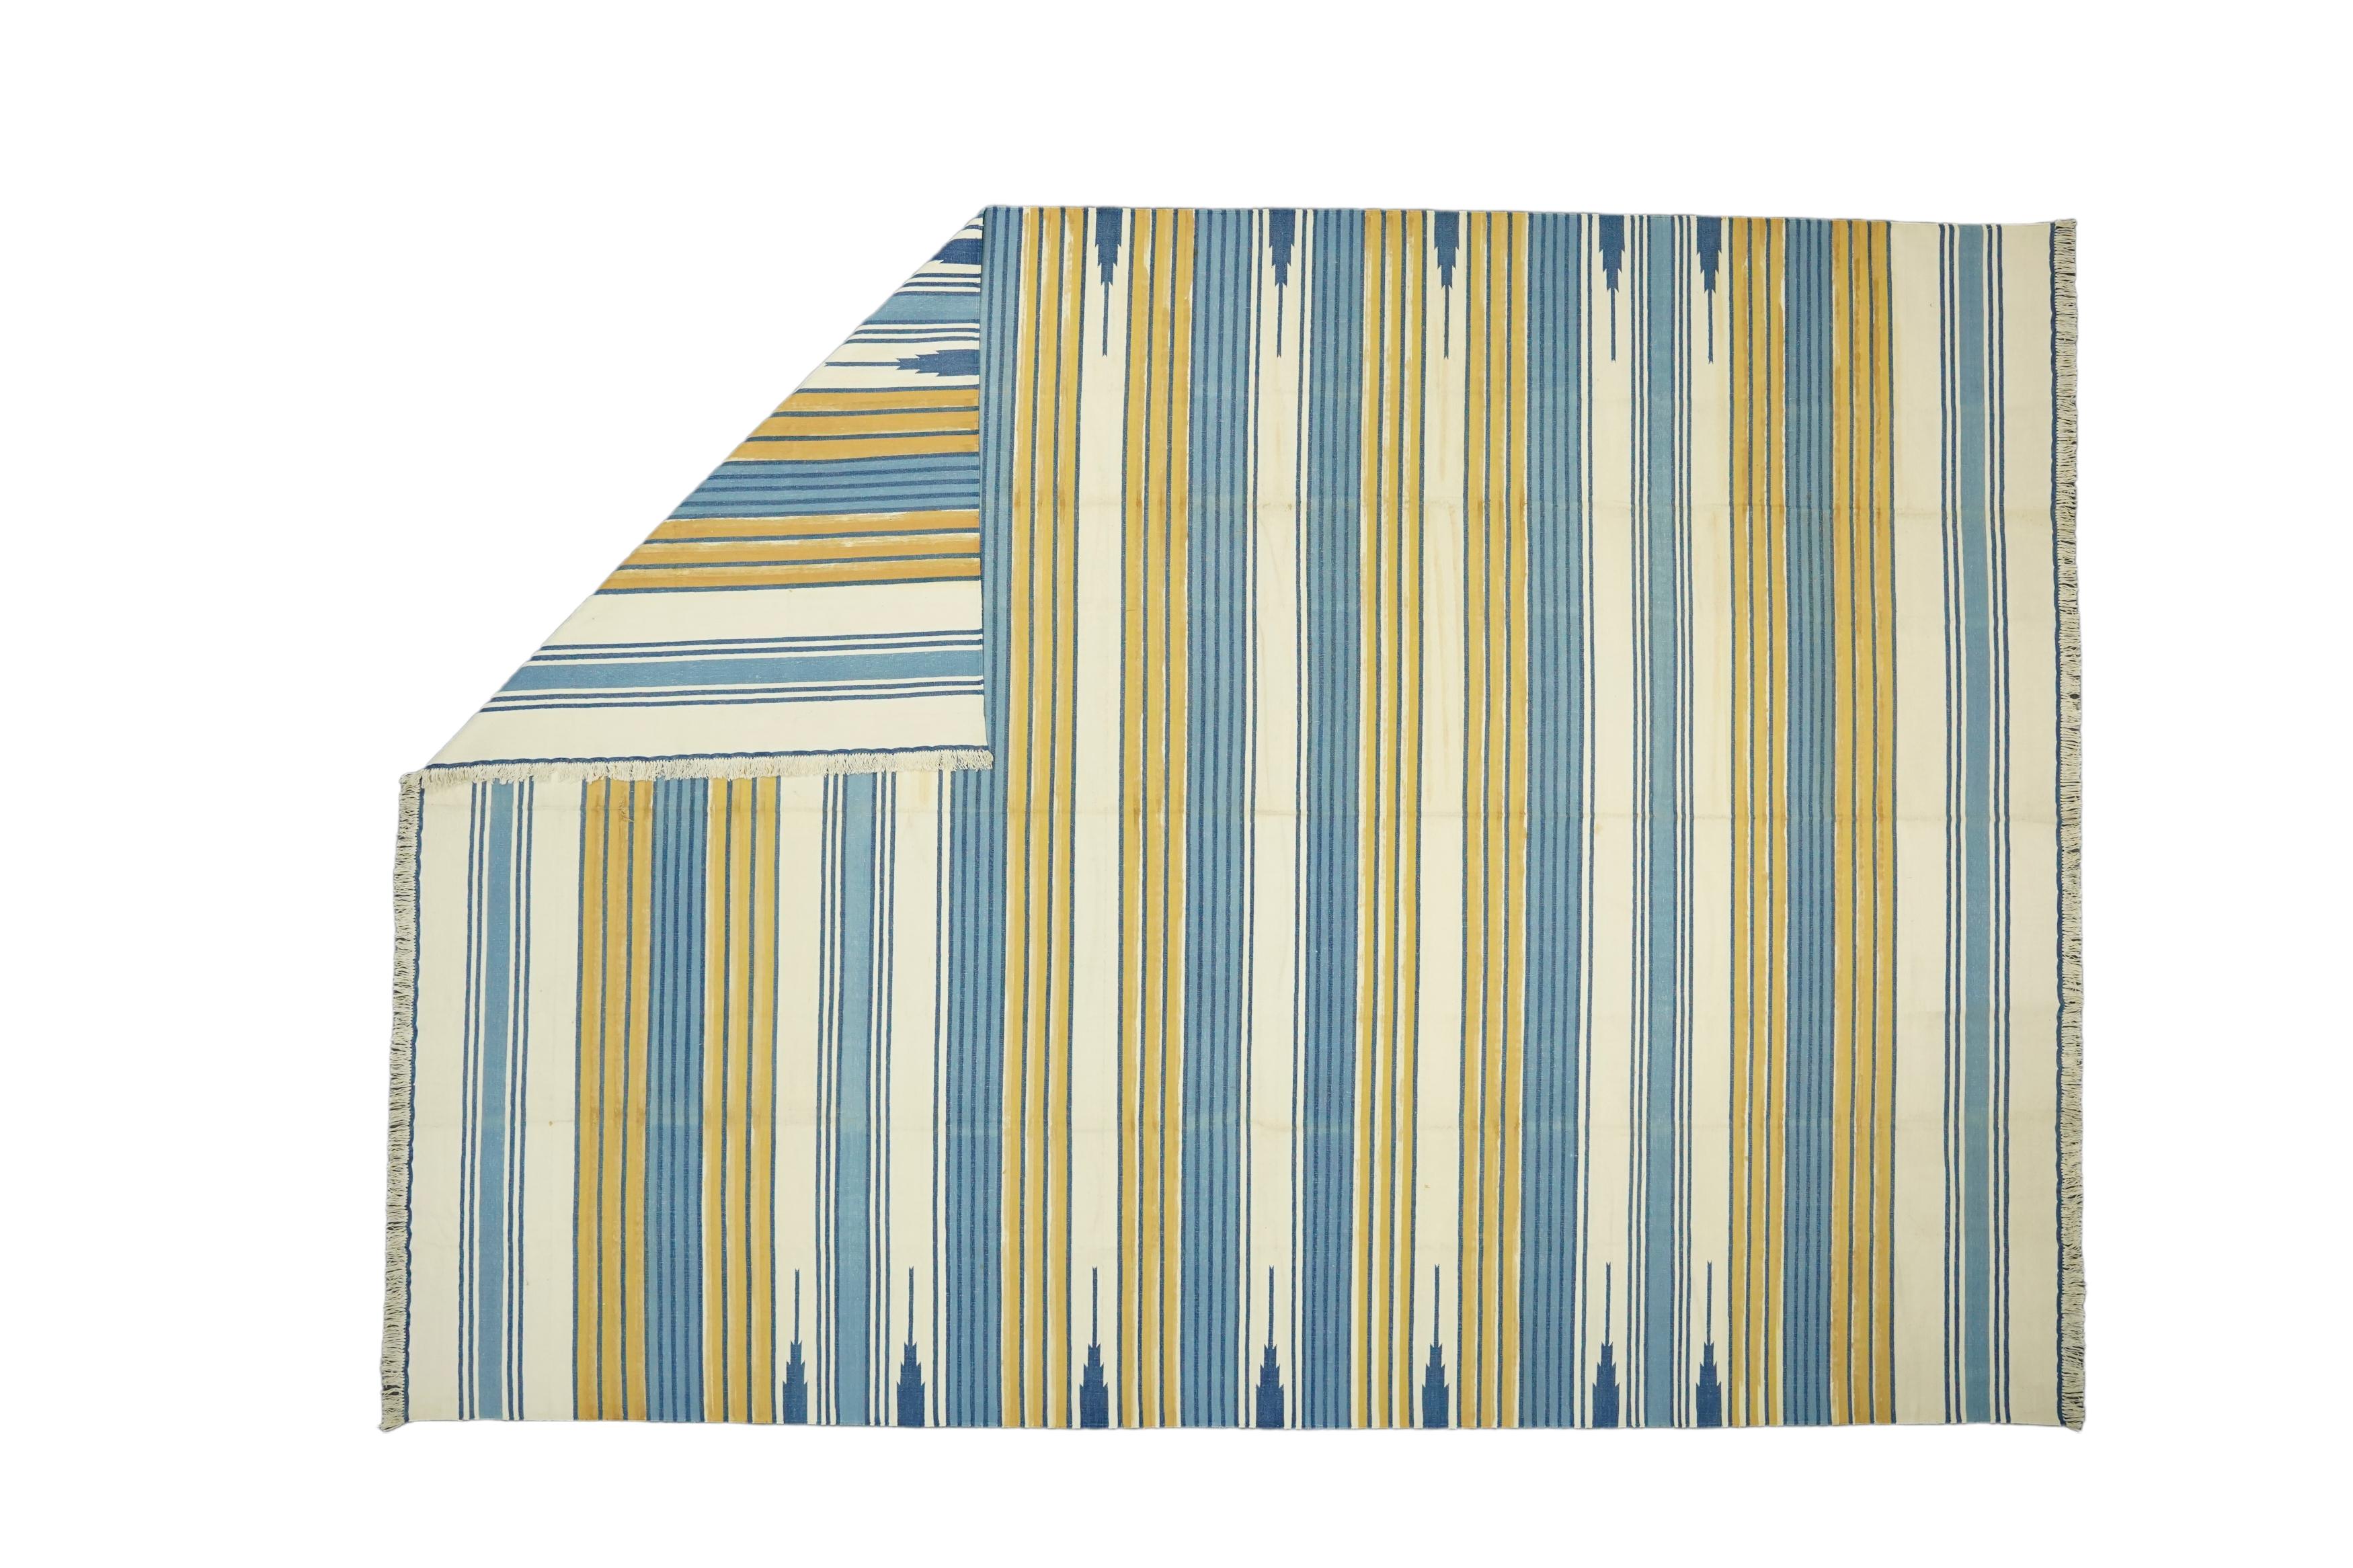 This 10x14 rug is a rare vintage Dhurrie rug from an exciting new mid-century curation by Rug & Kilim. Handwoven in a wool flatweave, it originates from India circa 1950-1960, and enjoys blue, cream and gold stripes. 

On the Design: 

Admirers of